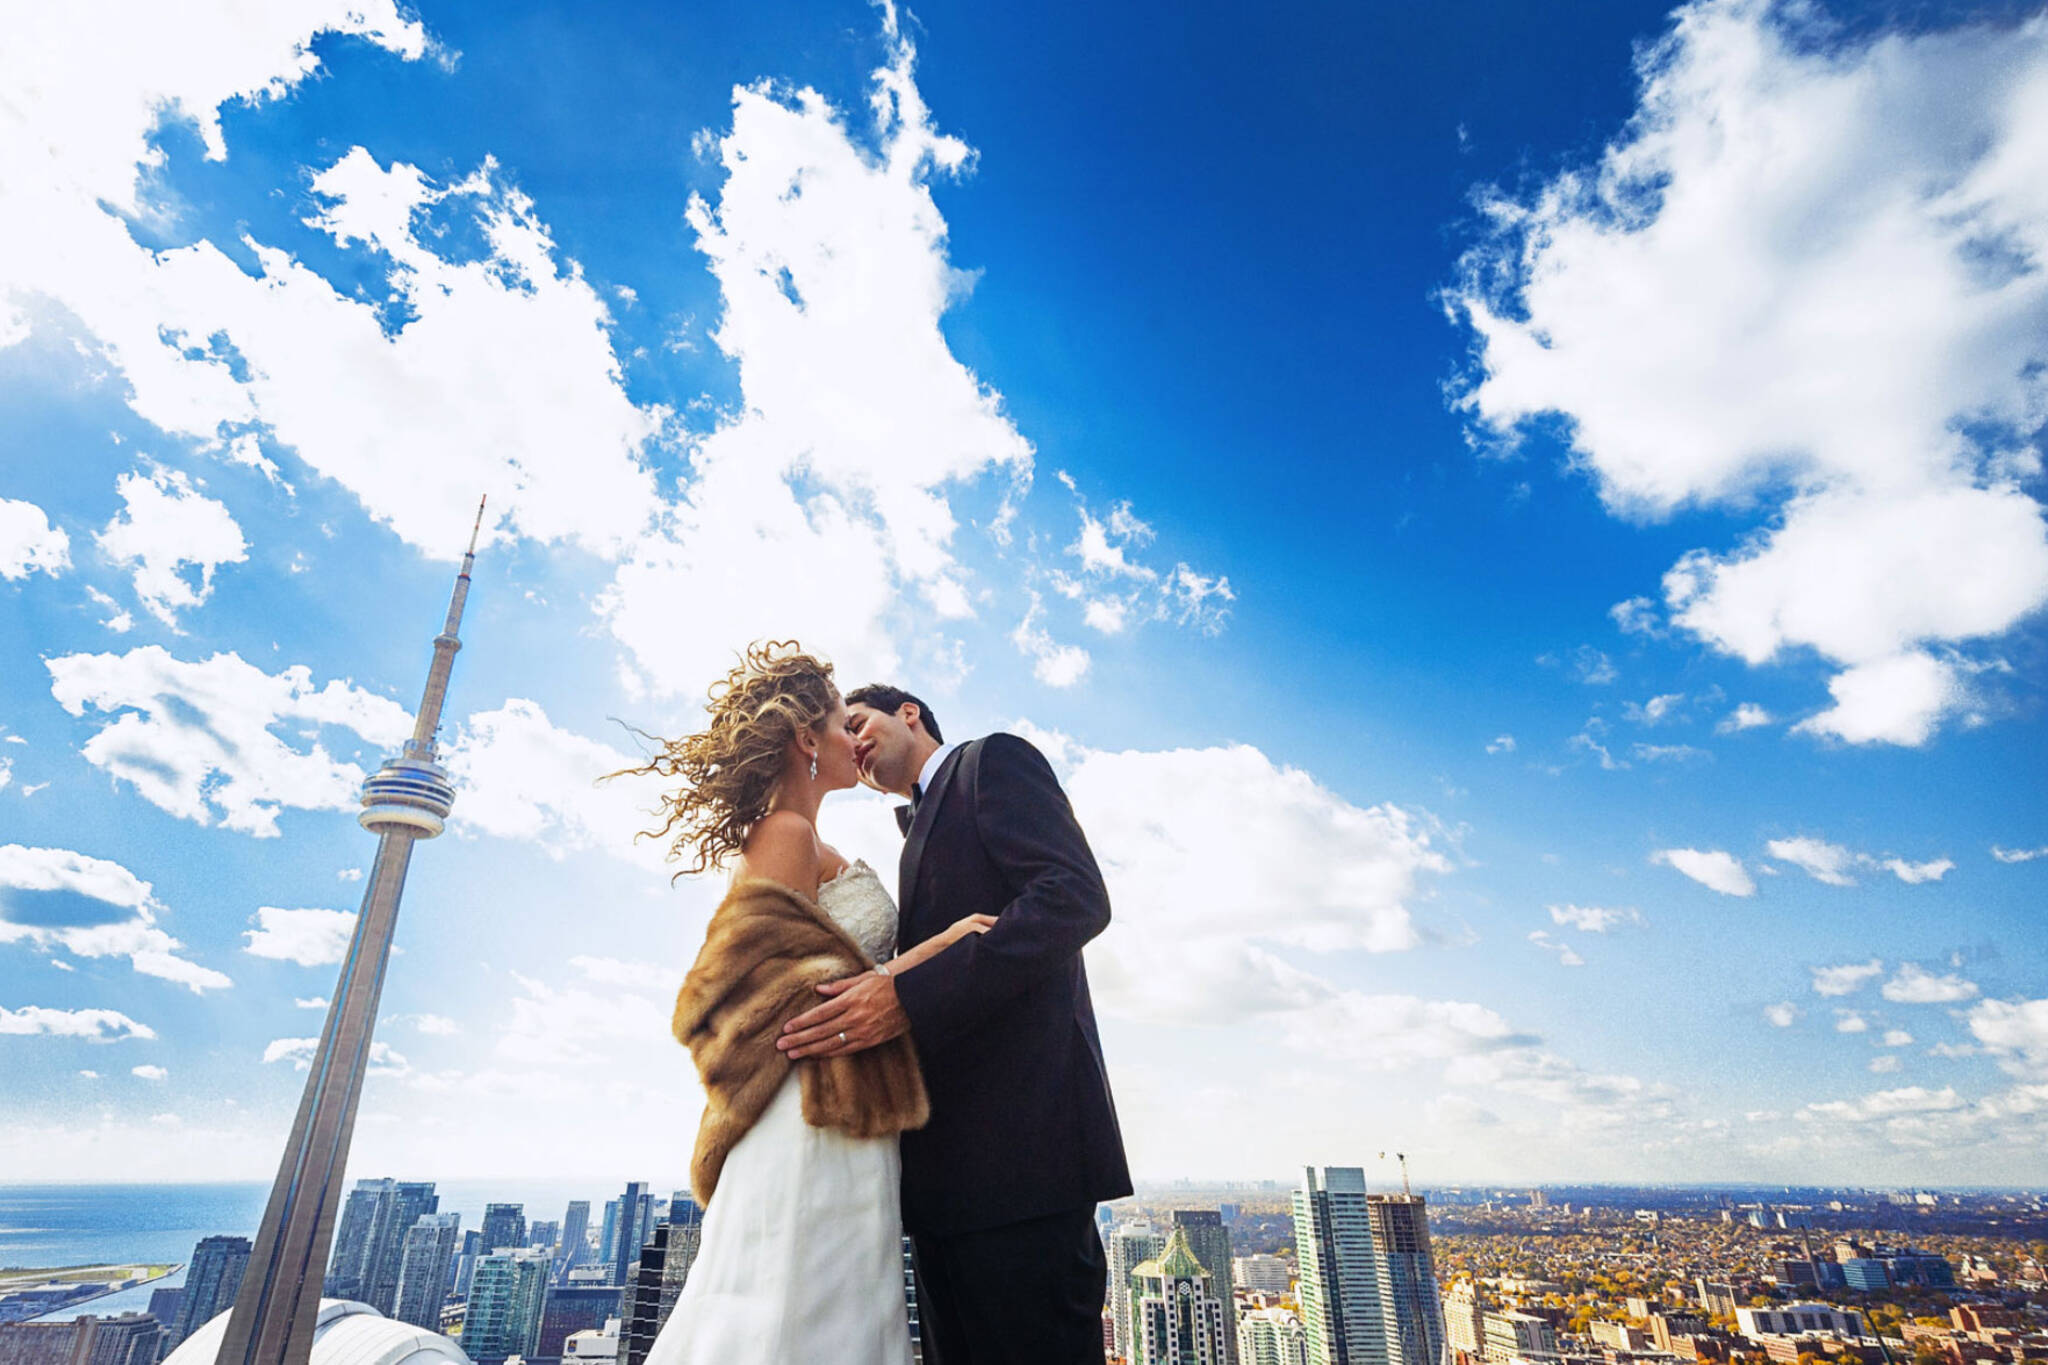 the-waitlist-to-get-a-marriage-licence-in-toronto-currently-lasts-for